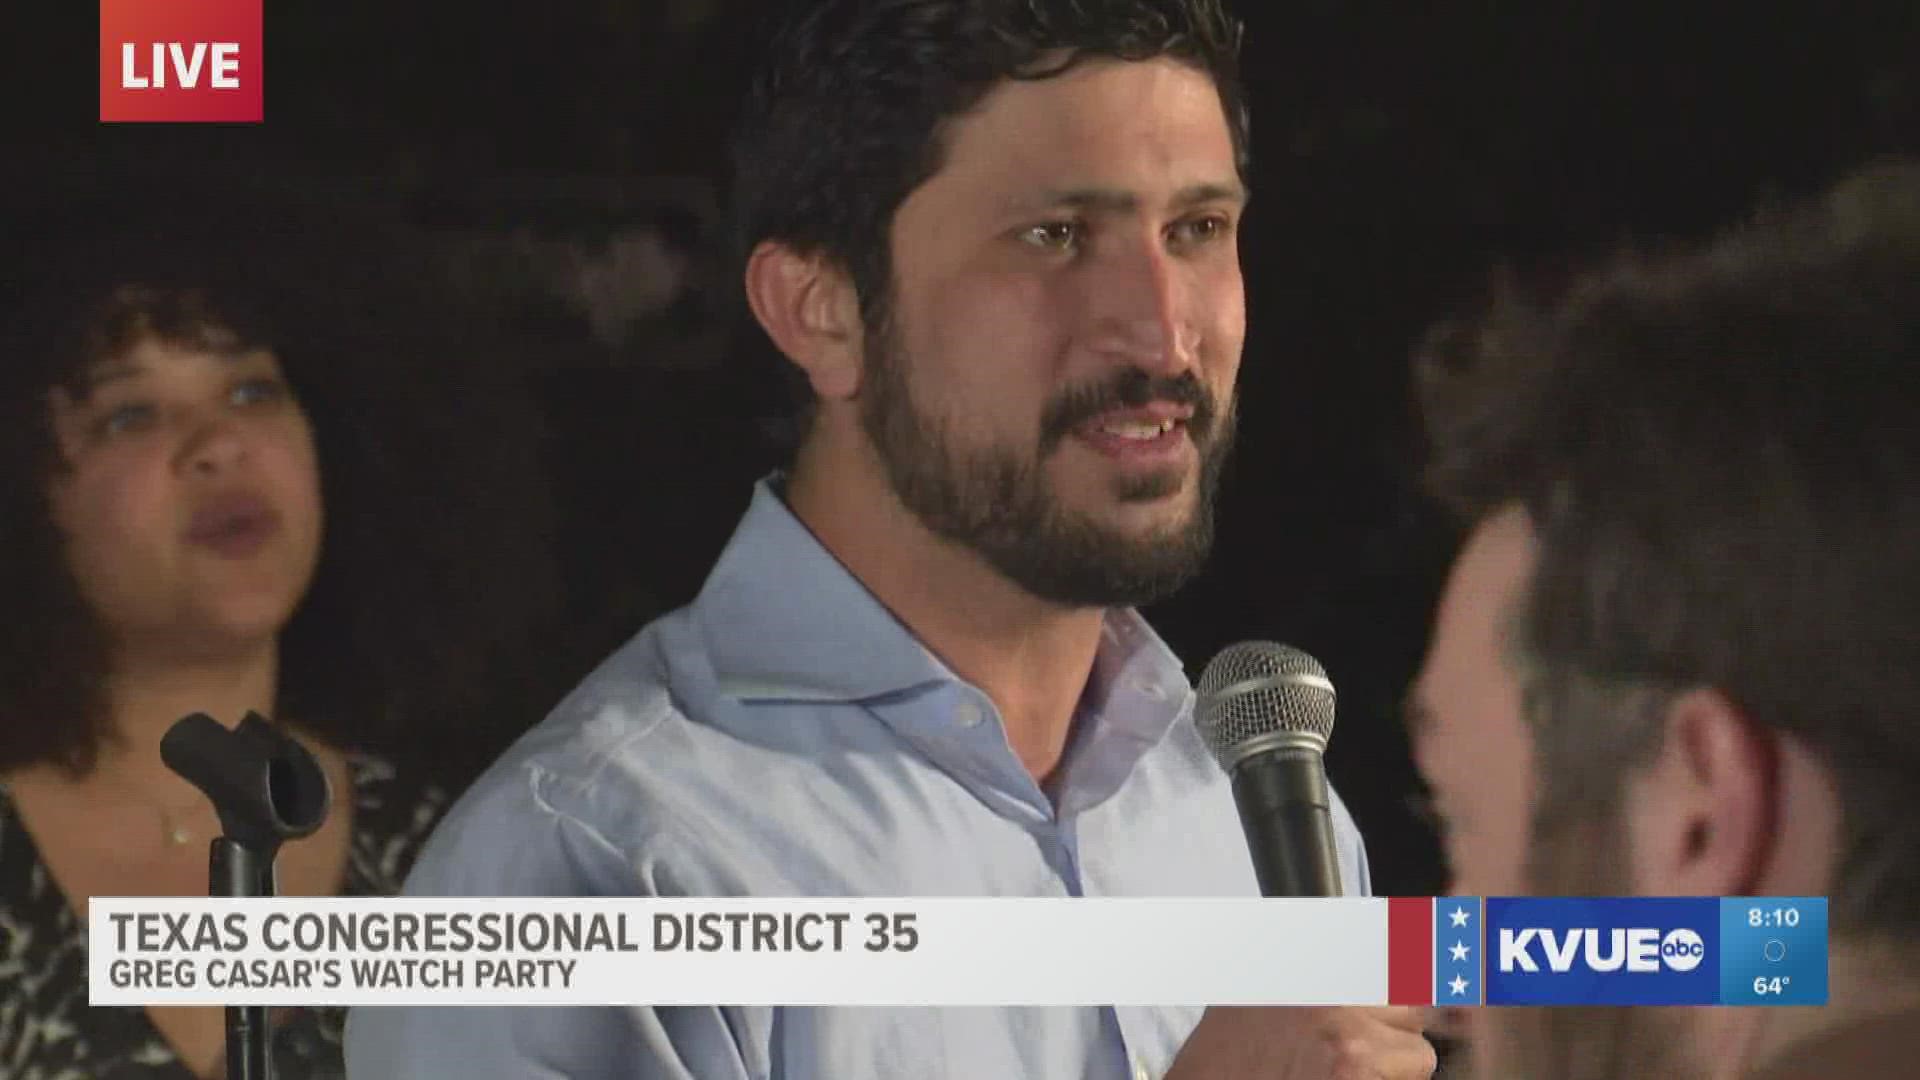 Democratic candidate for U.S. House District 35 Greg Casar speaks from his watch party.